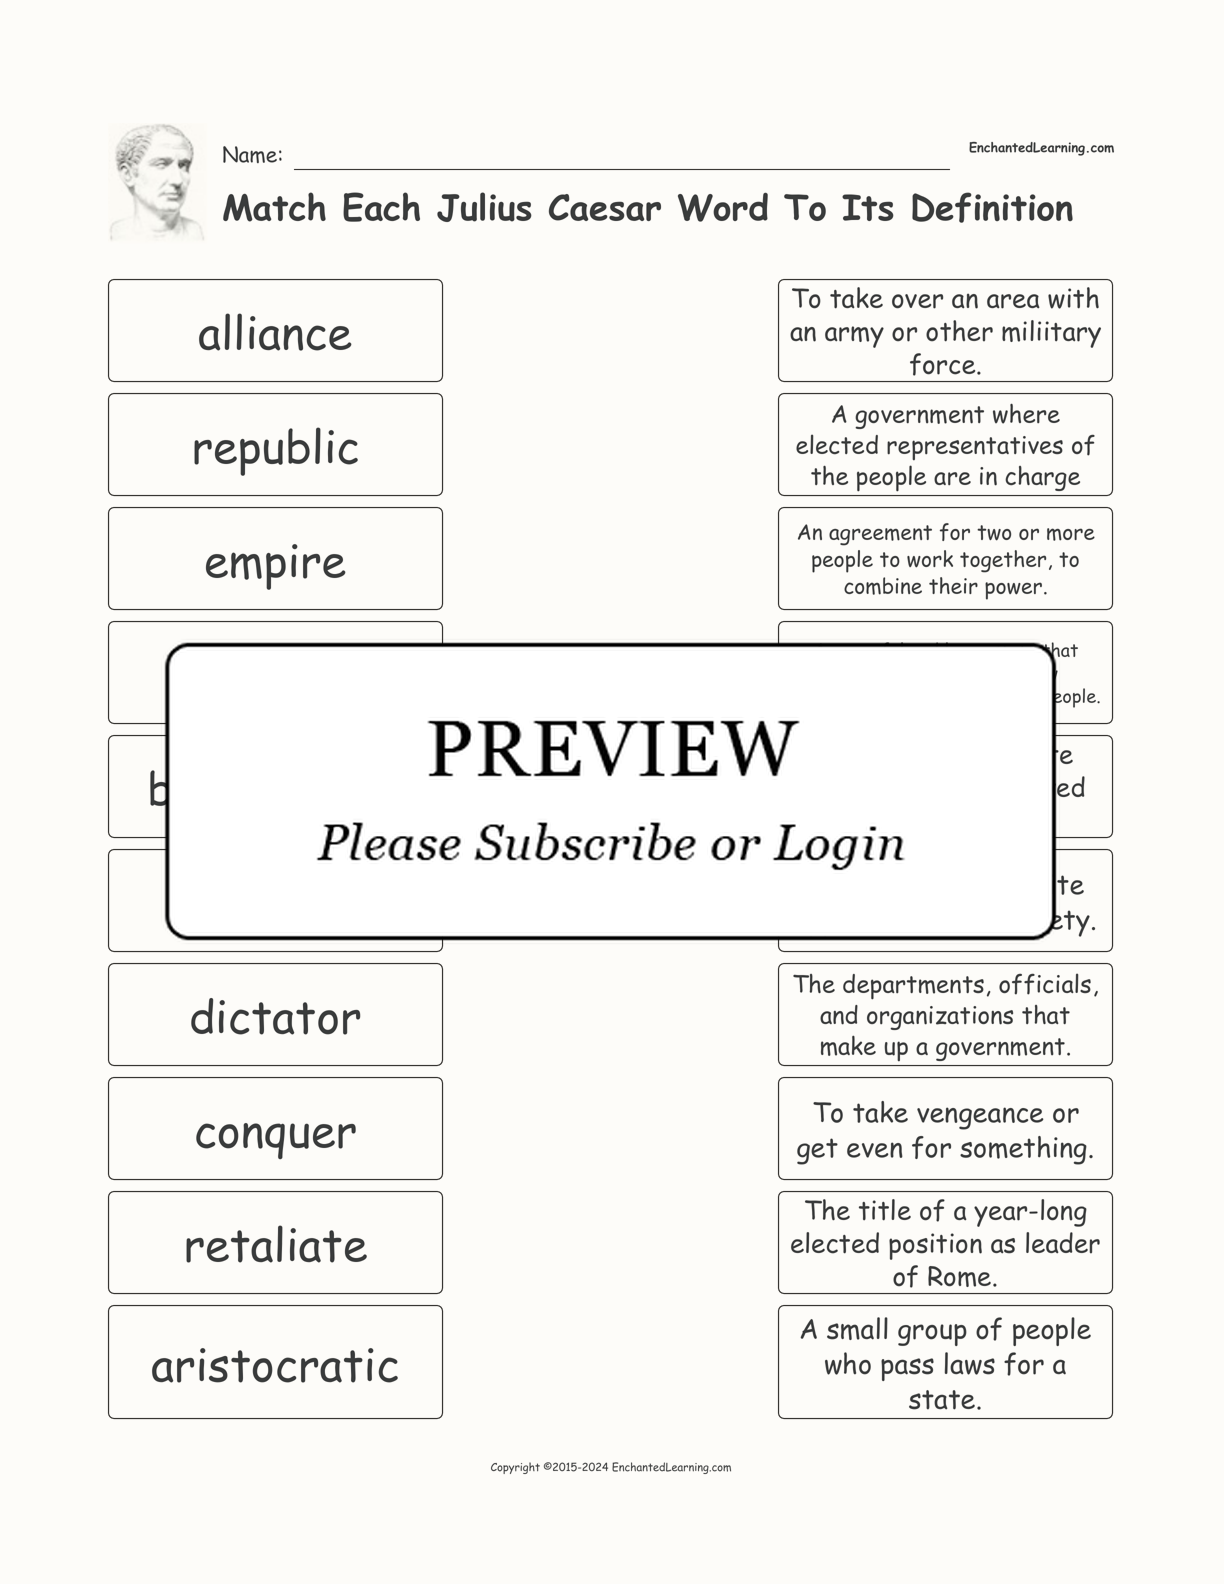 Match Each Julius Caesar-Related Word to its Definition interactive worksheet page 1